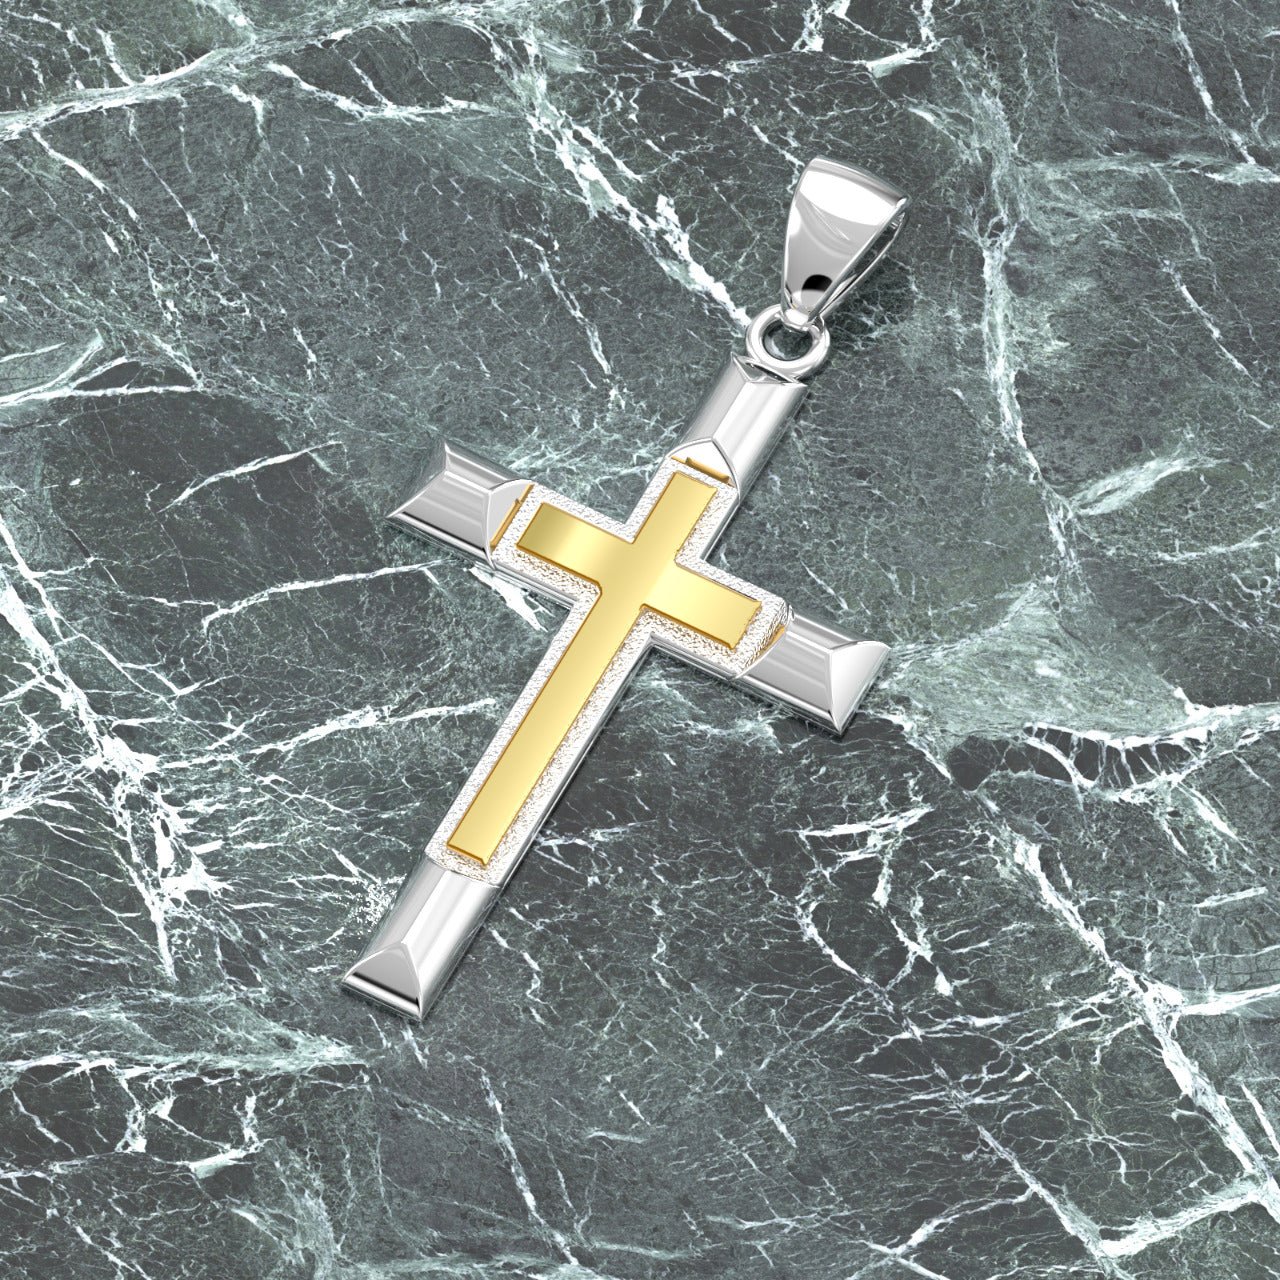 Double Cross Necklace - Cross Pendant Necklace In Dome Shape